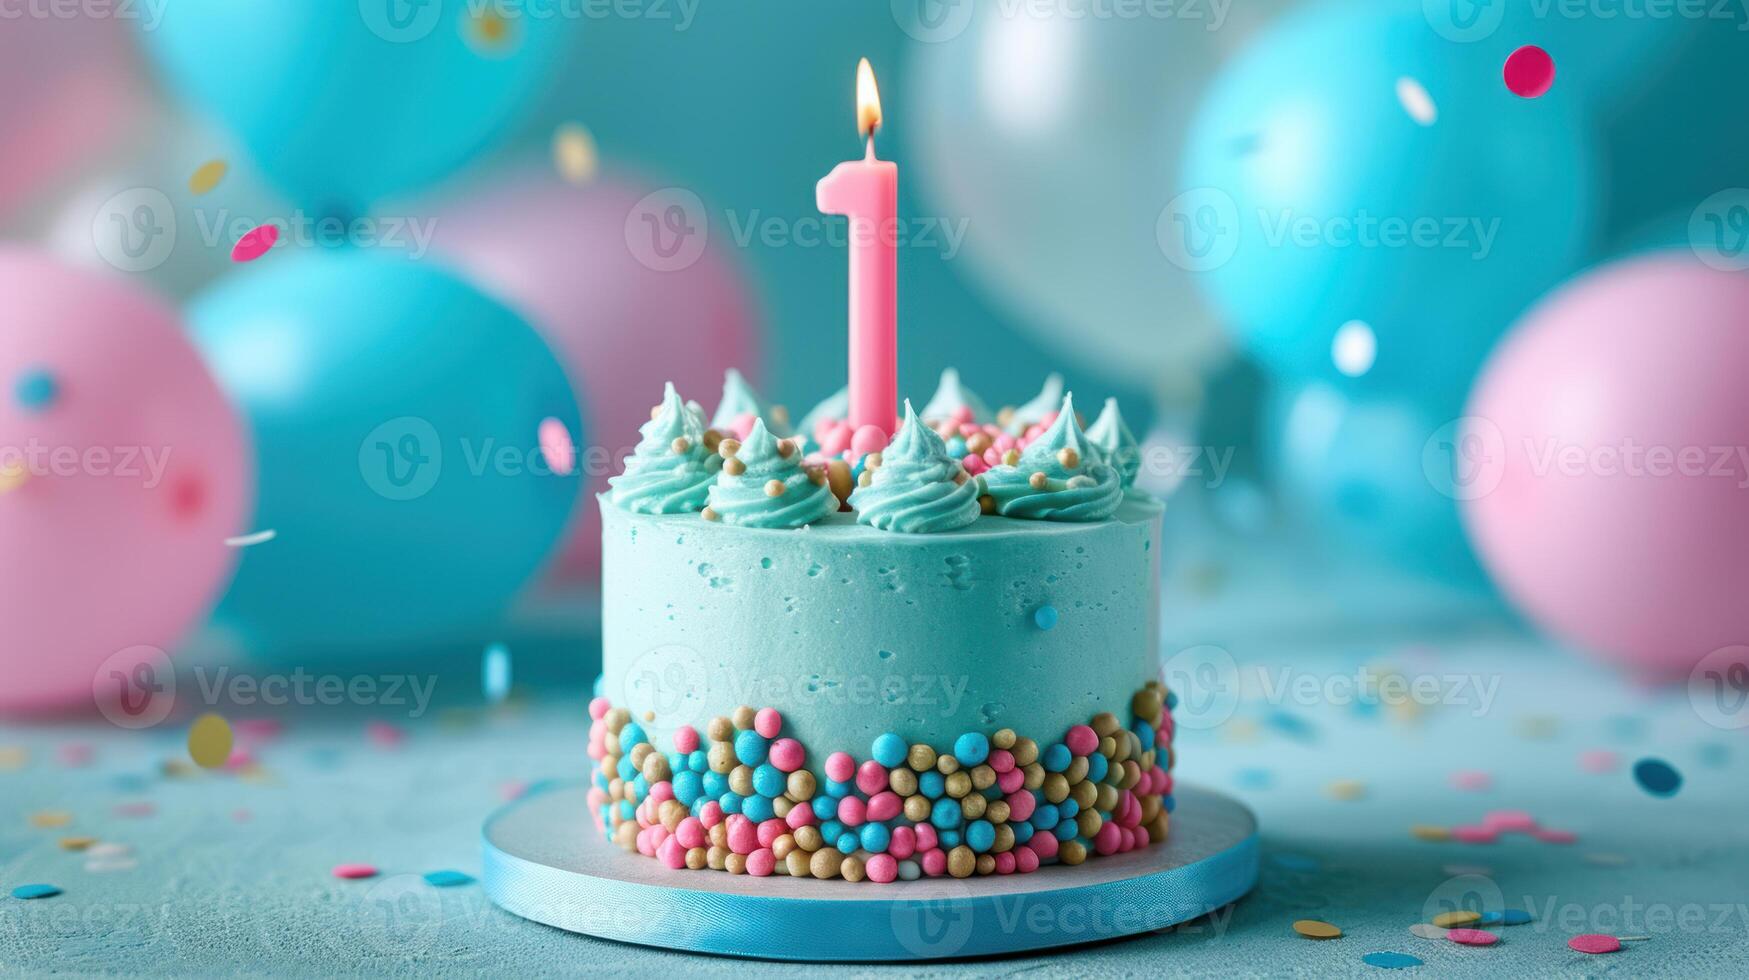 Blue frosted birthday cake with a single candle, surrounded by colorful balloons and confetti. photo